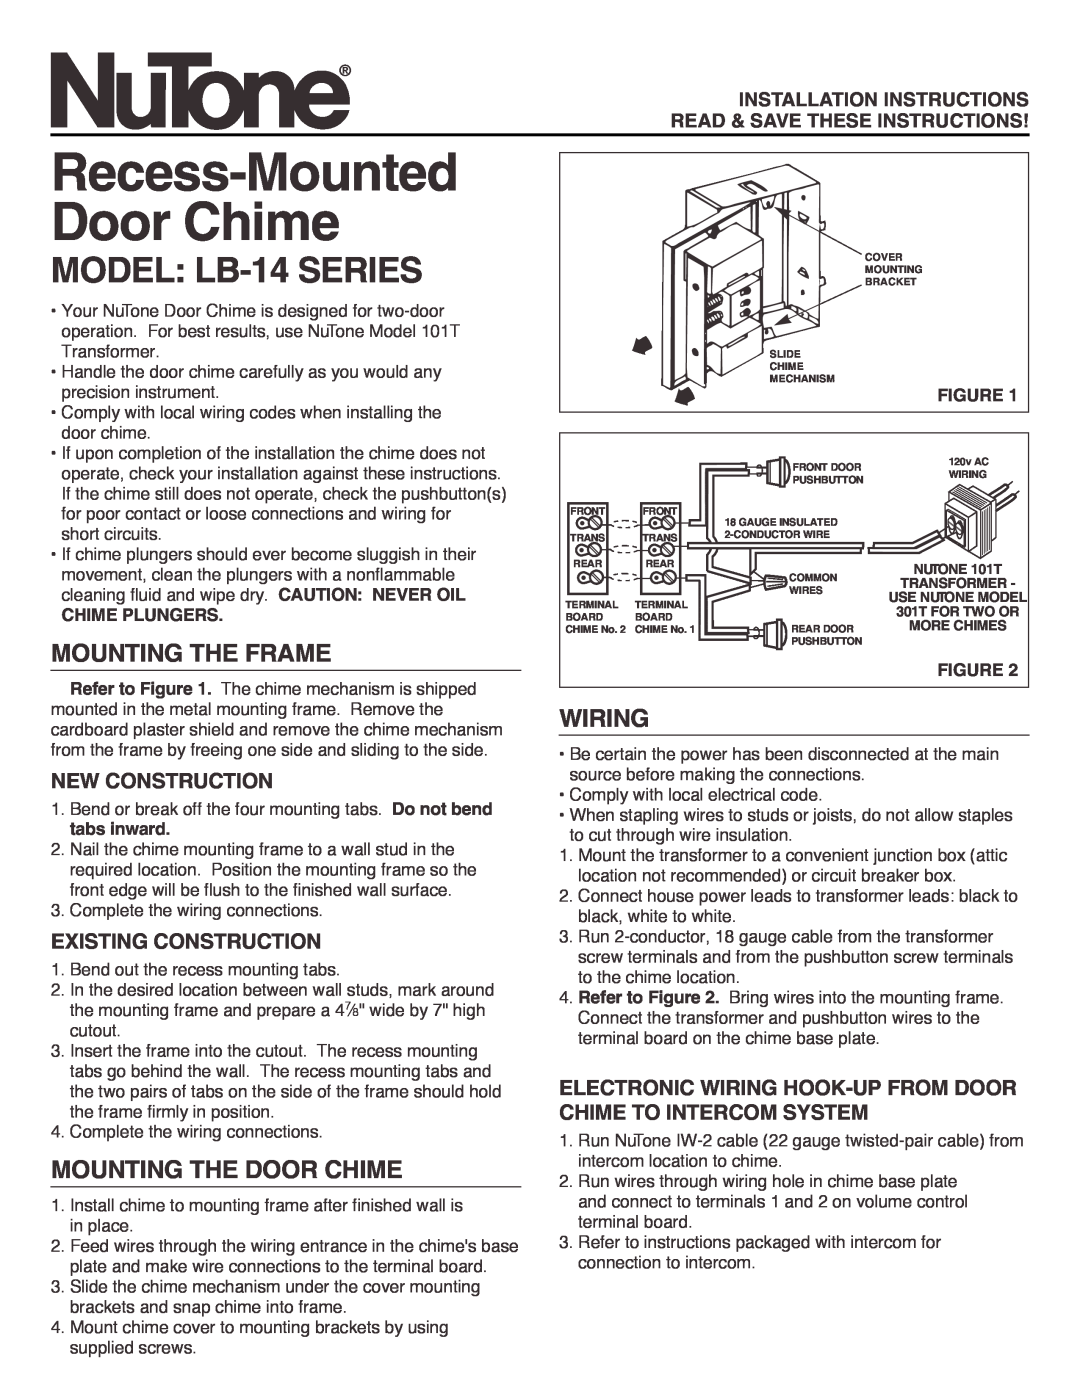 NuTone installation instructions Recess-MountedDoor Chime, MODEL LB-14SERIES, Mounting The Frame, Wiring 